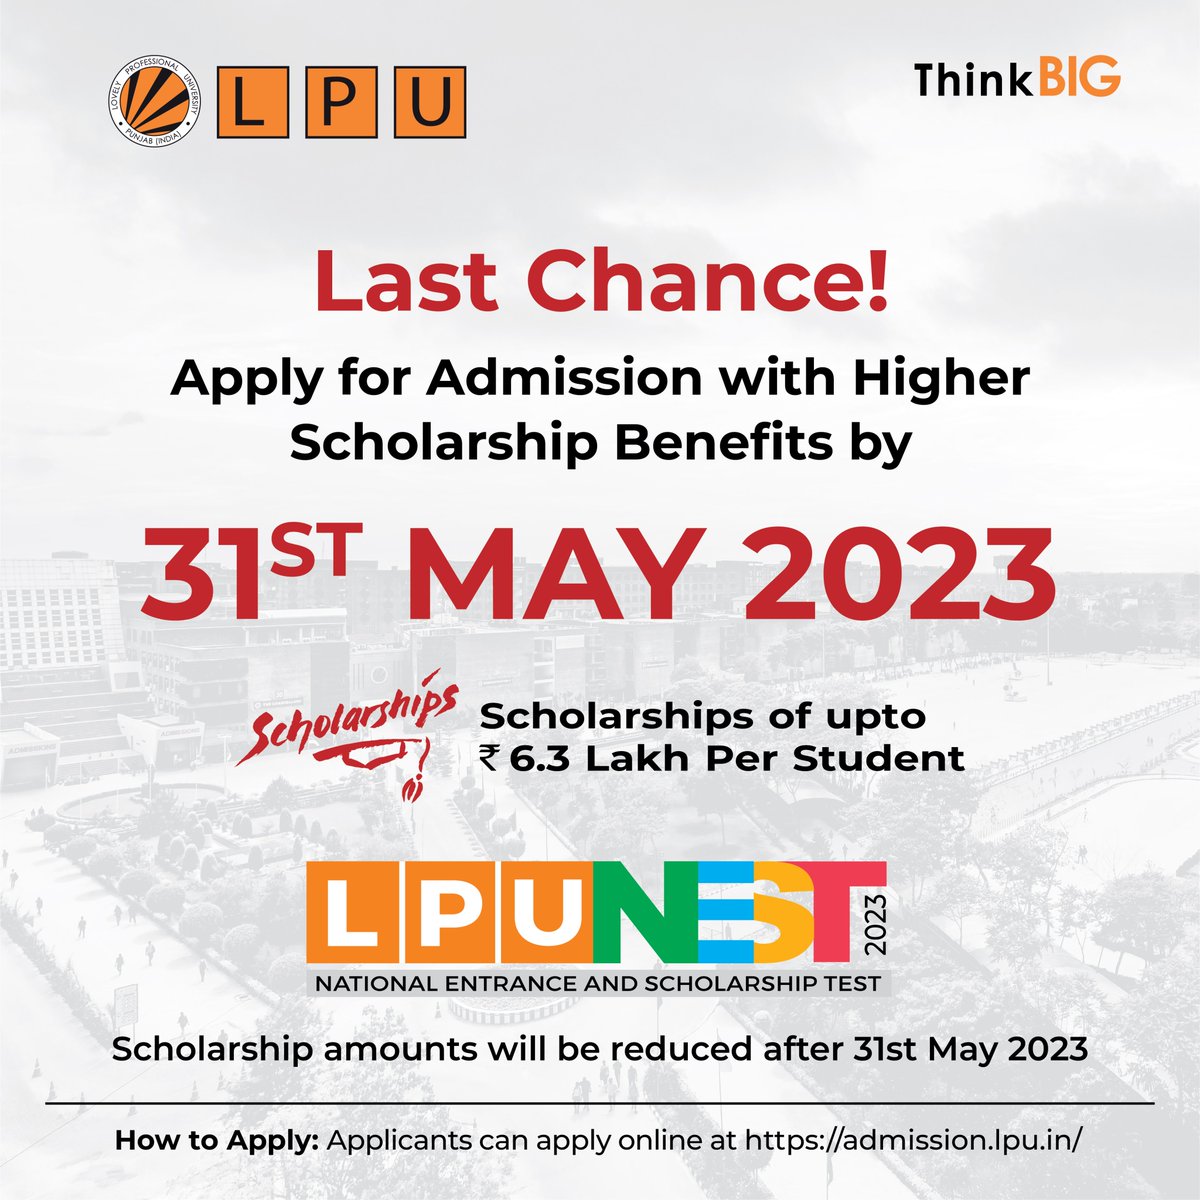 Admissions Closing Soon. Join one of the top Universities & be a Proud Verto

#lpudesign #lpuuniversity #bestcampus #graetexperience #newlearnings #leadinguniversity #hollisticdevelopment #aheadwithtime #comejoinus #admissionsopen #proudvertos